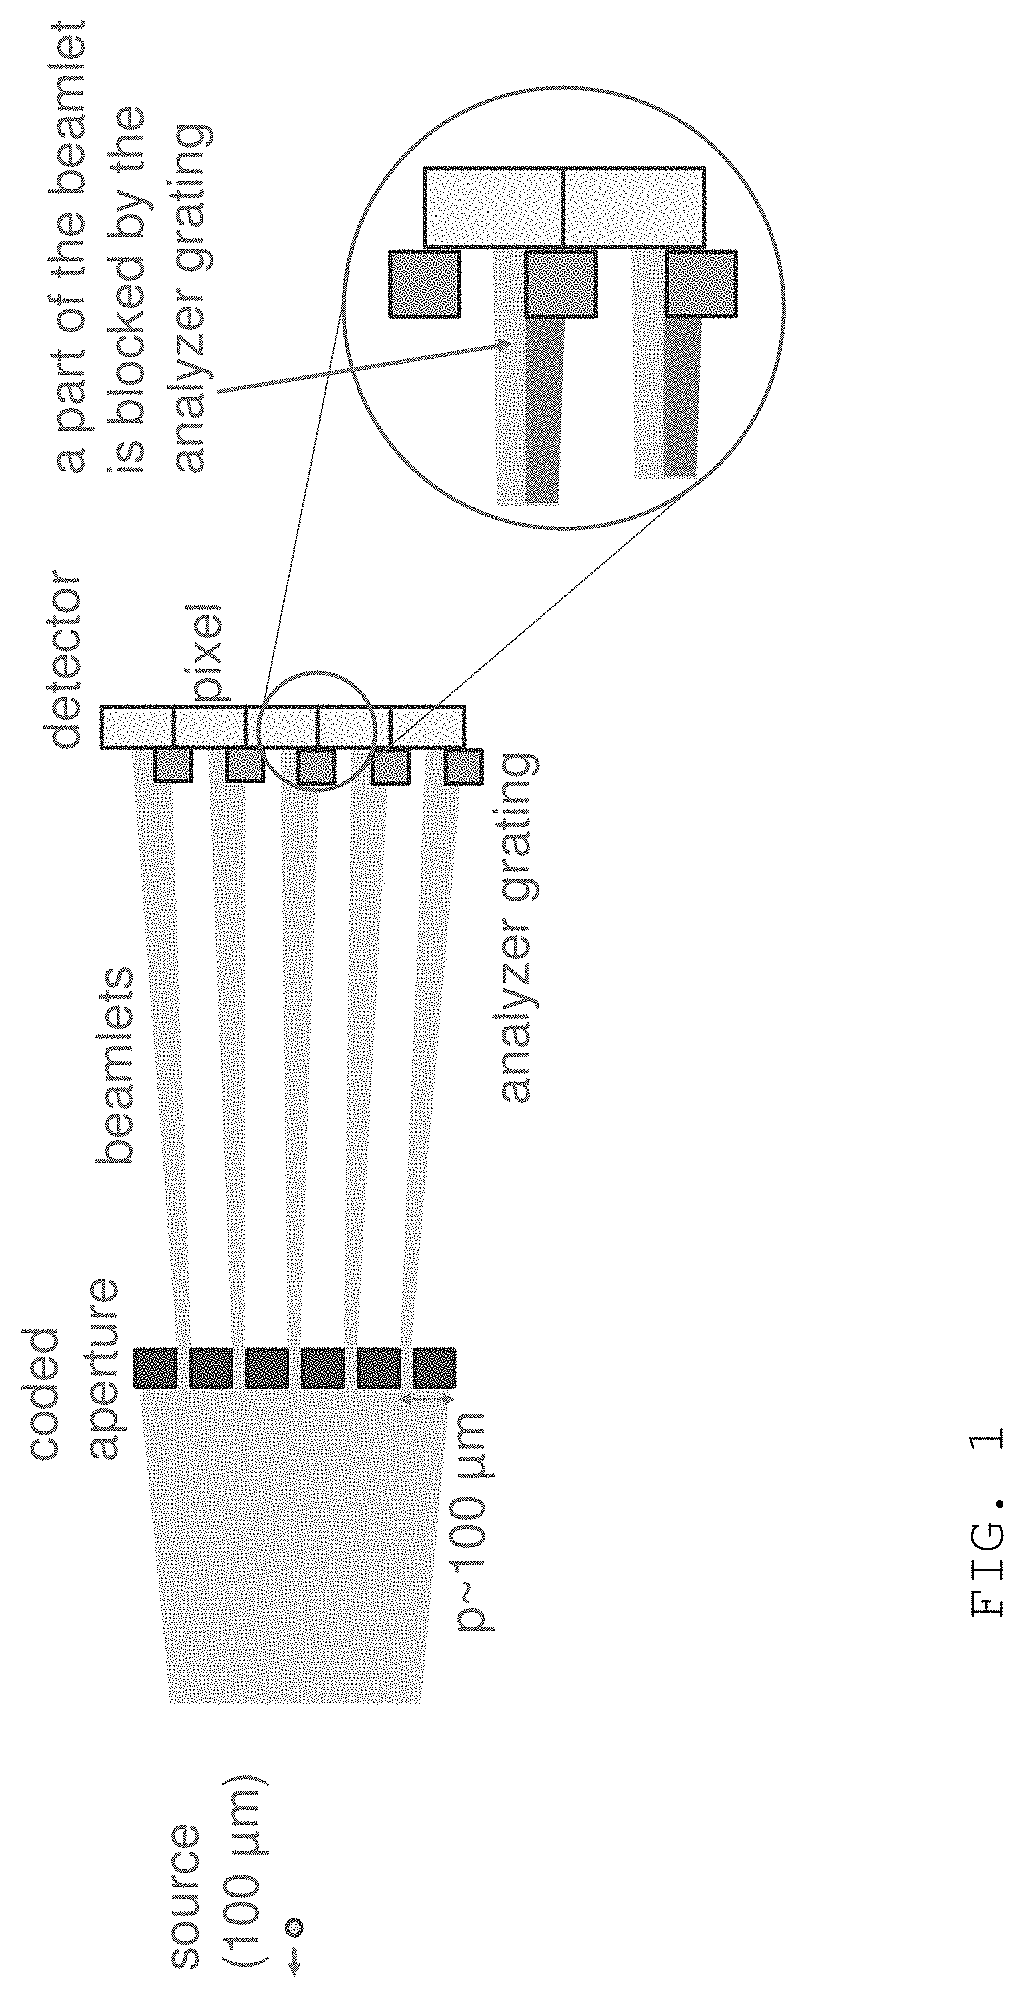 Phase contrast imaging method